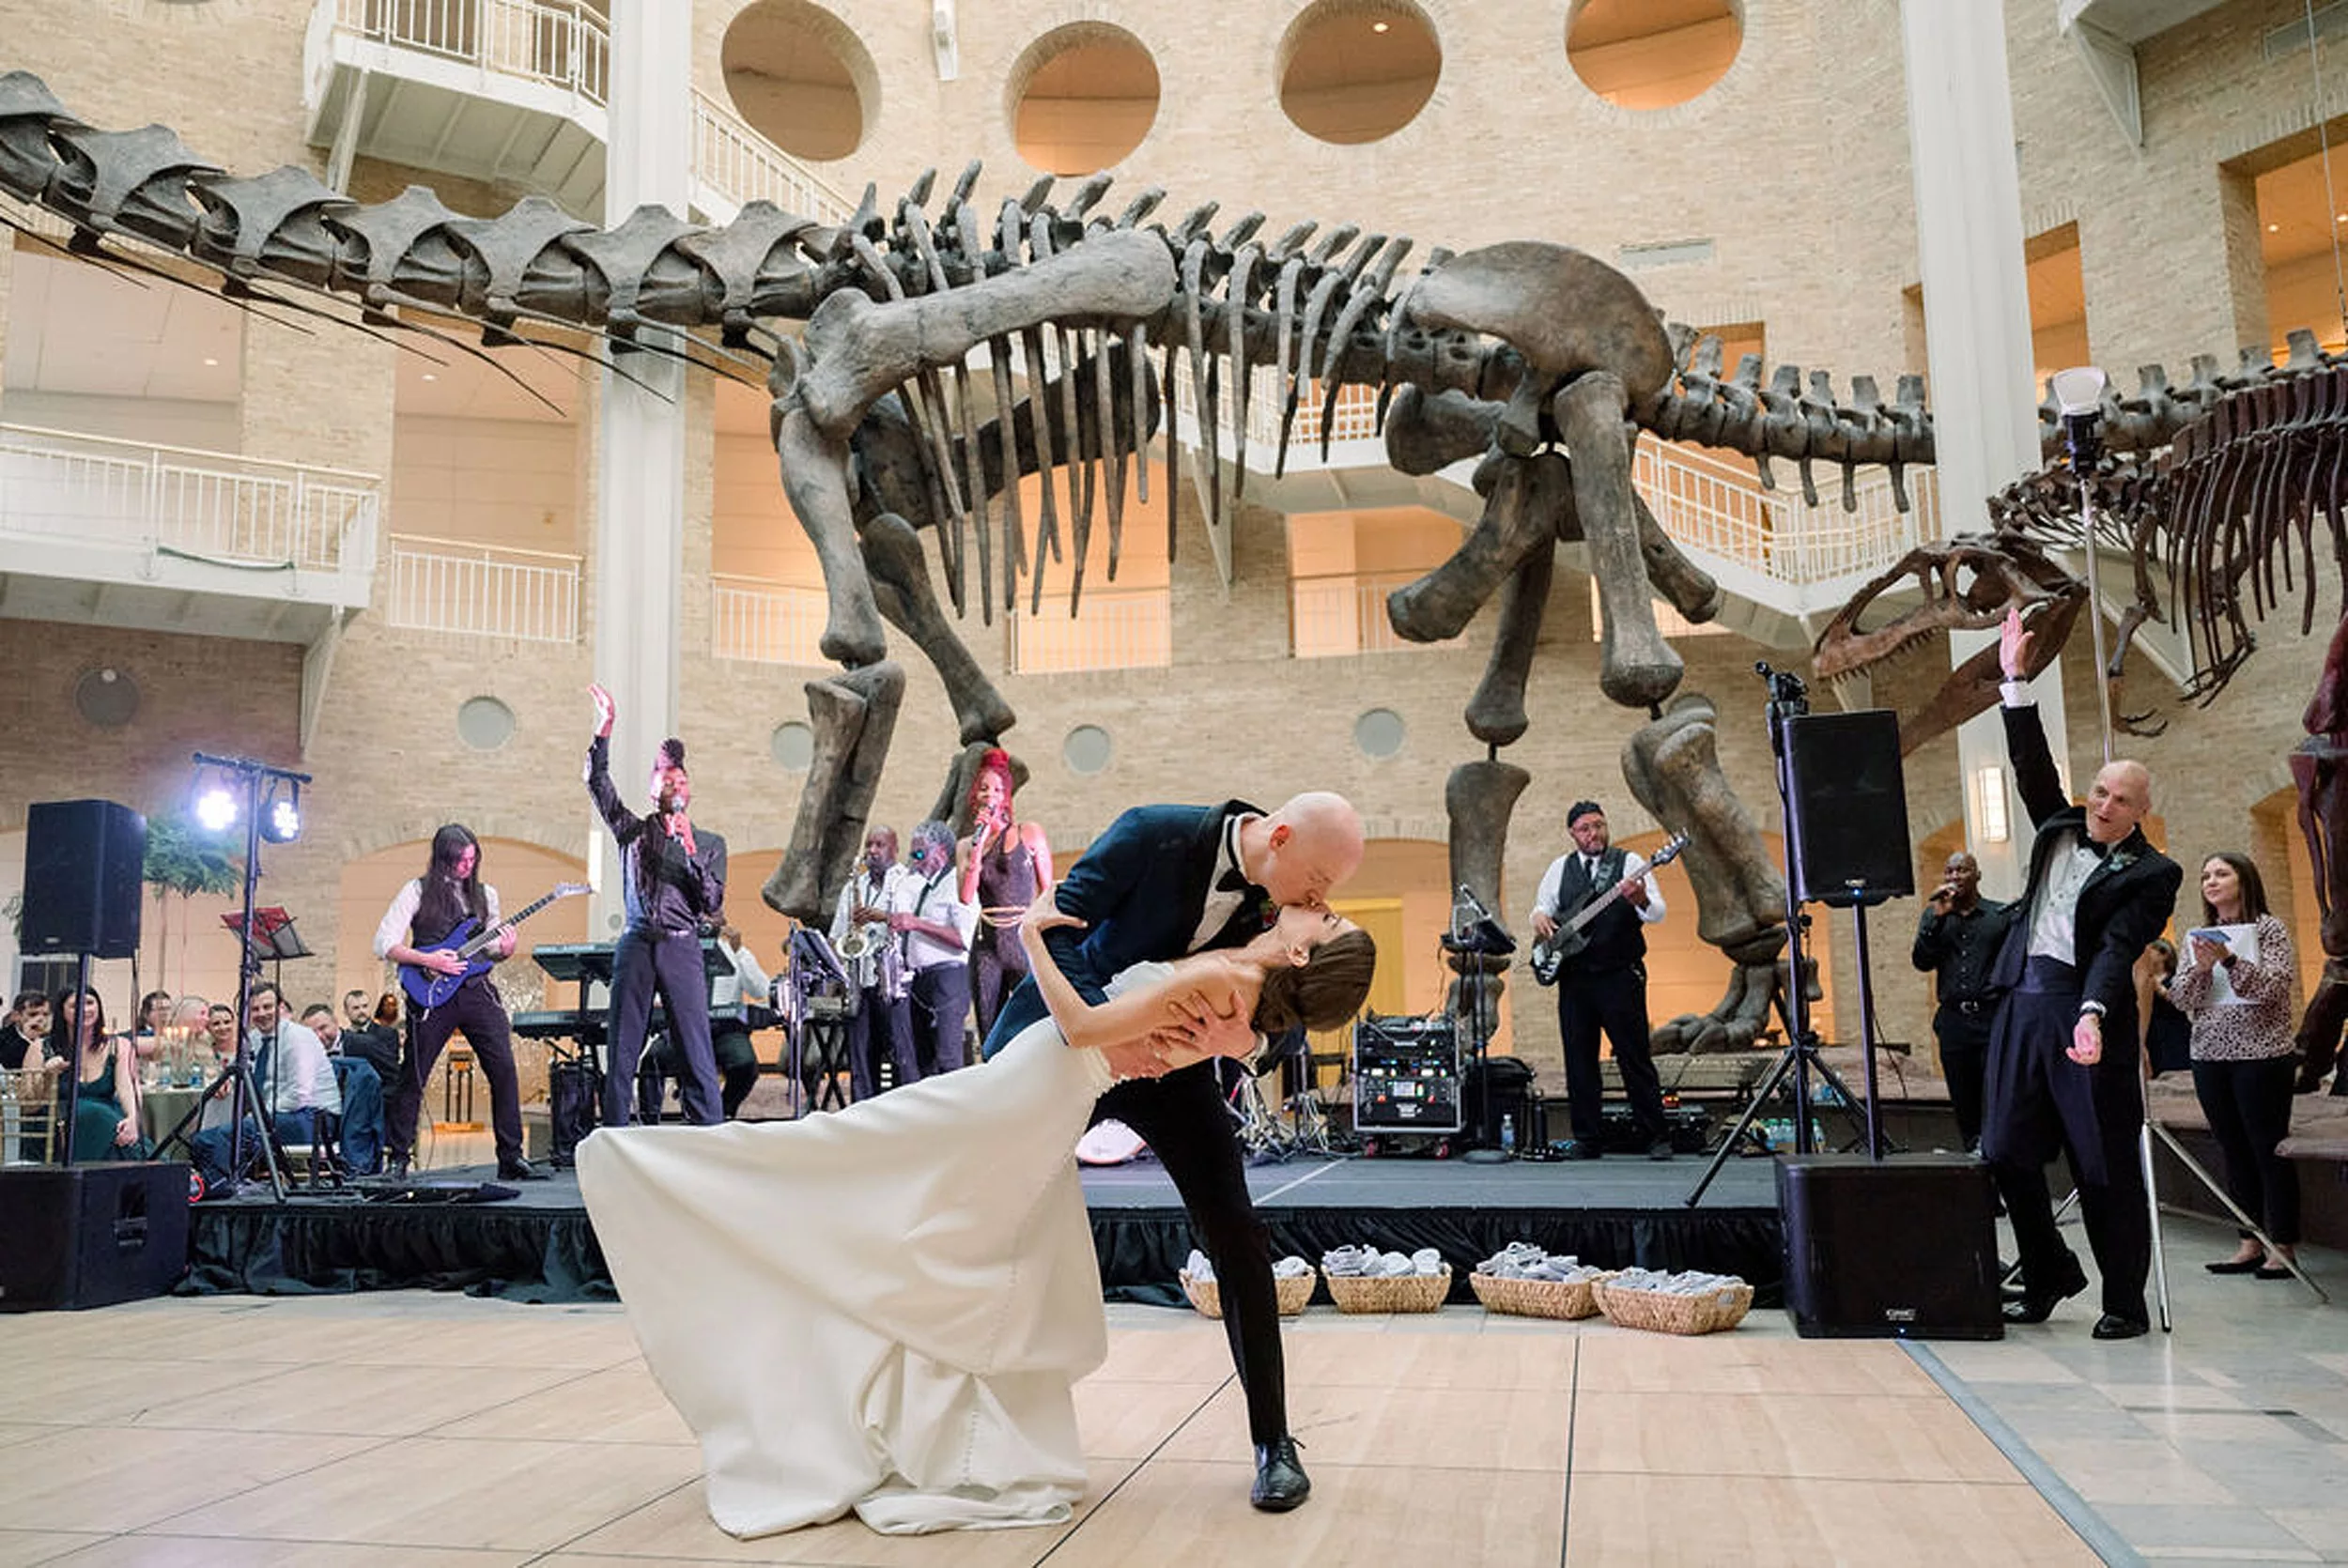 A groom dips his bride and kisses her as their band plays during their first dance in front of a dinosaur skeleton at their jurassic park wedding reception